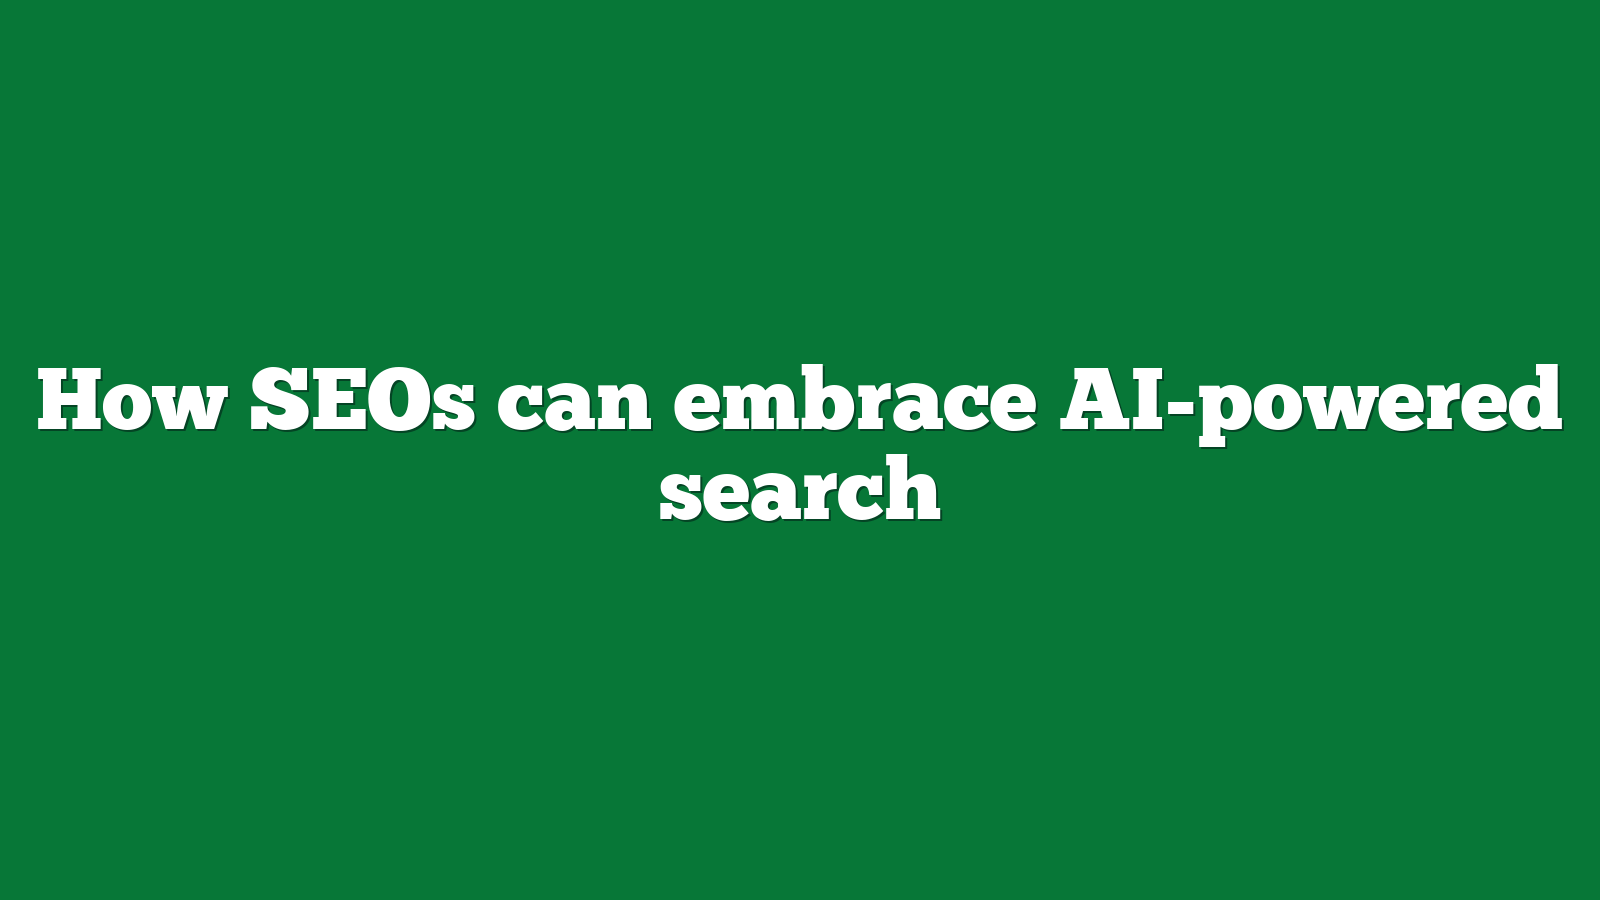 How SEOs can embrace AI-powered search